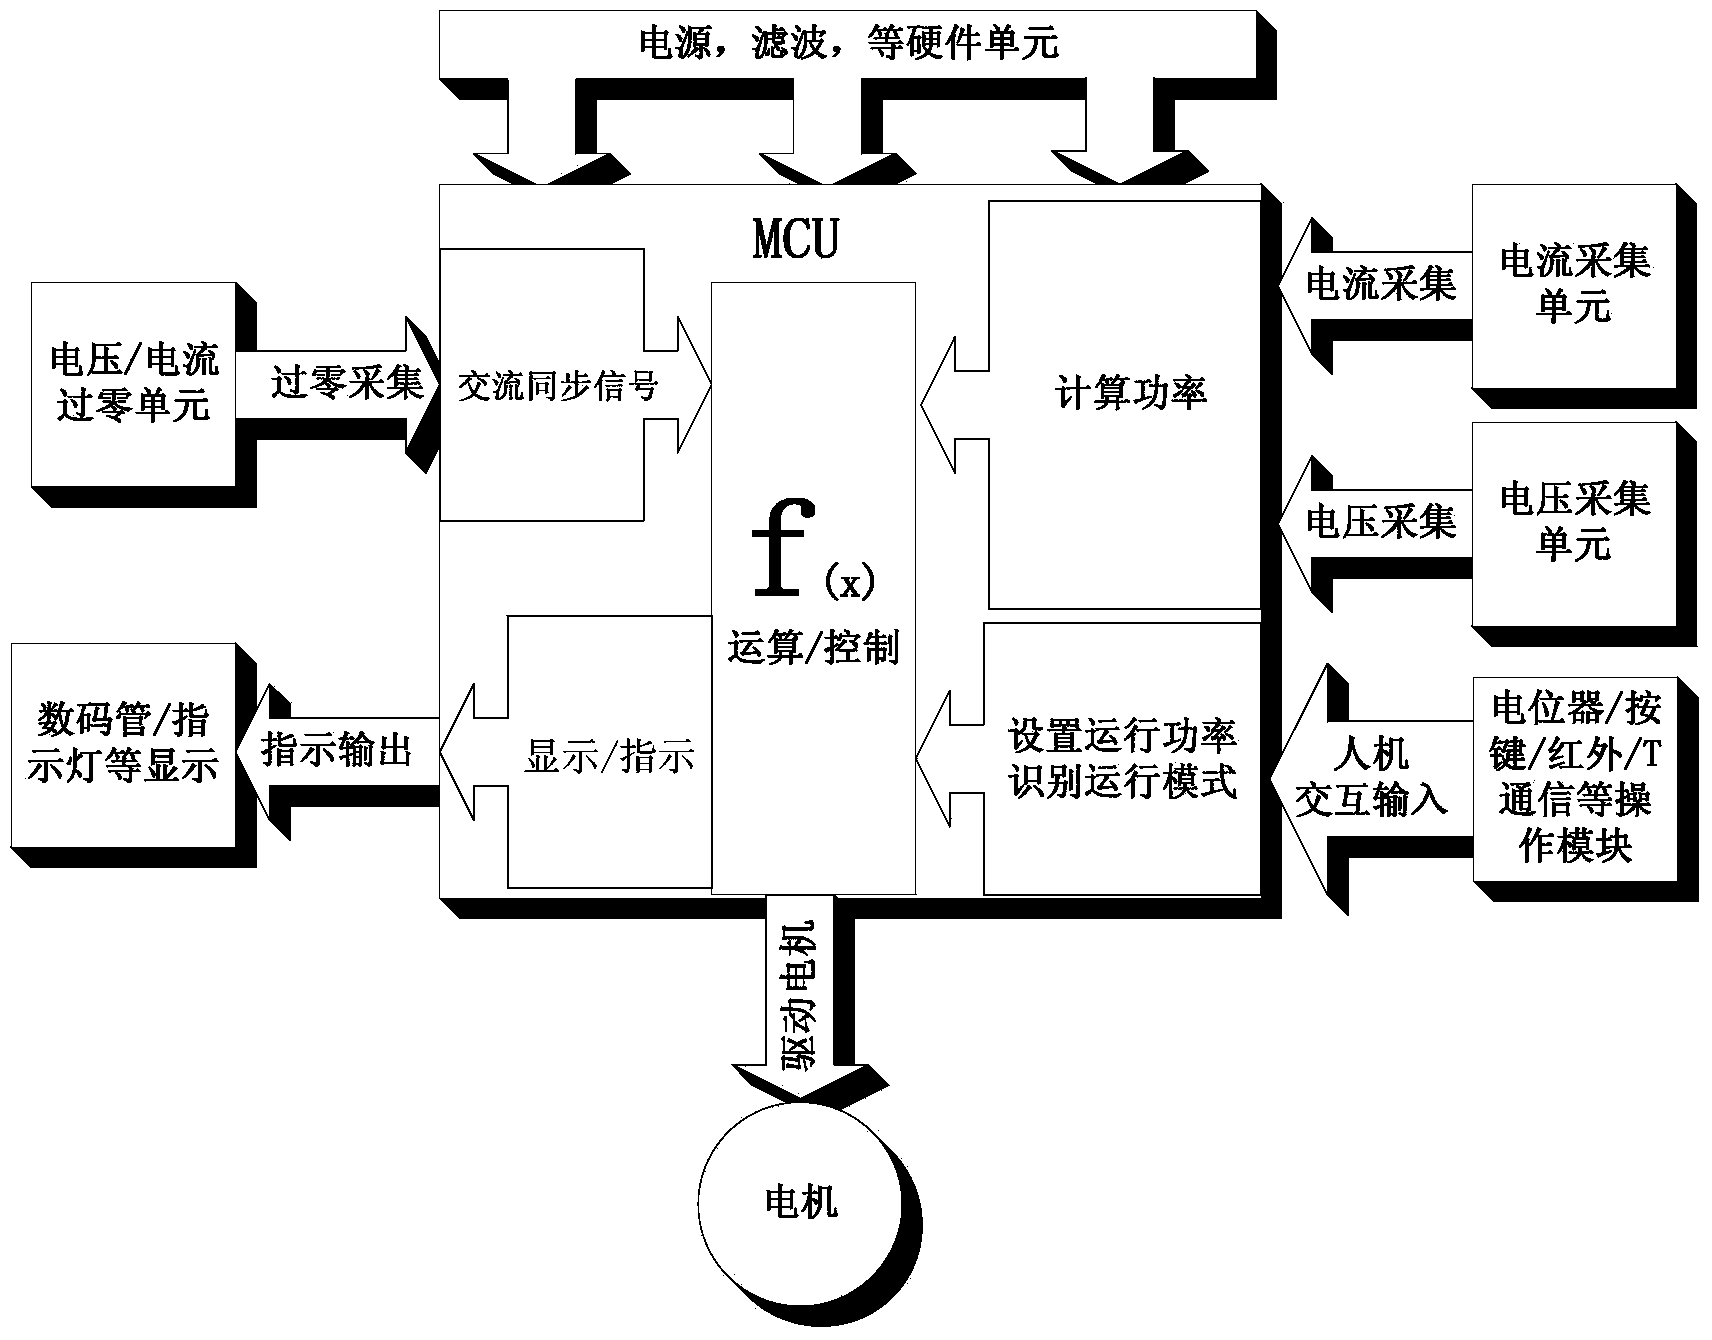 High-efficiency low-power consumption electronic controller used for dust collector